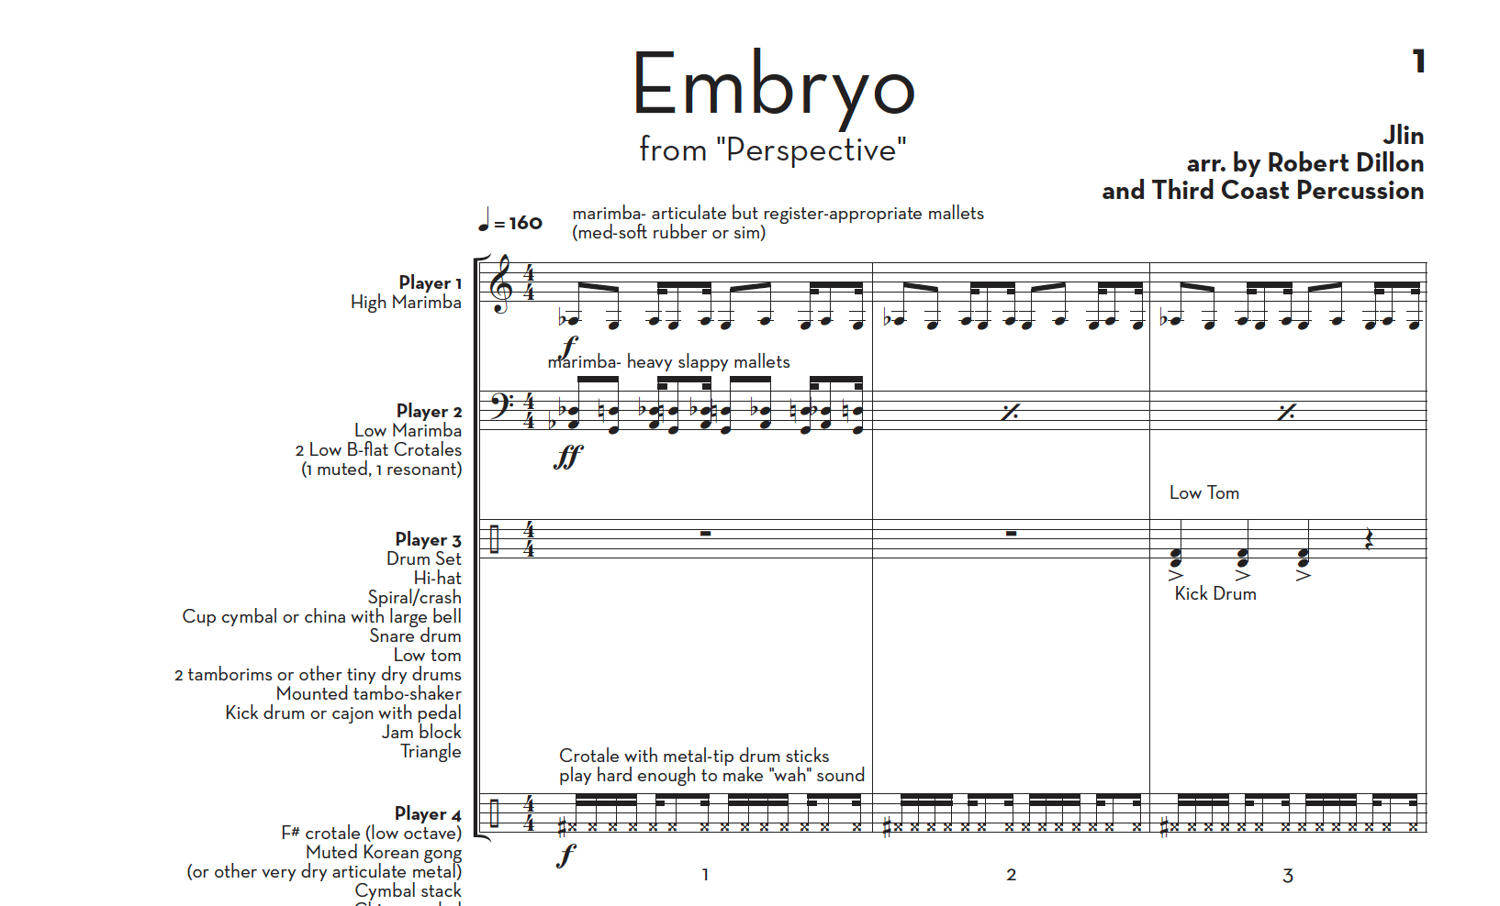 Image of "Embryo" from Perspective - Score and Parts